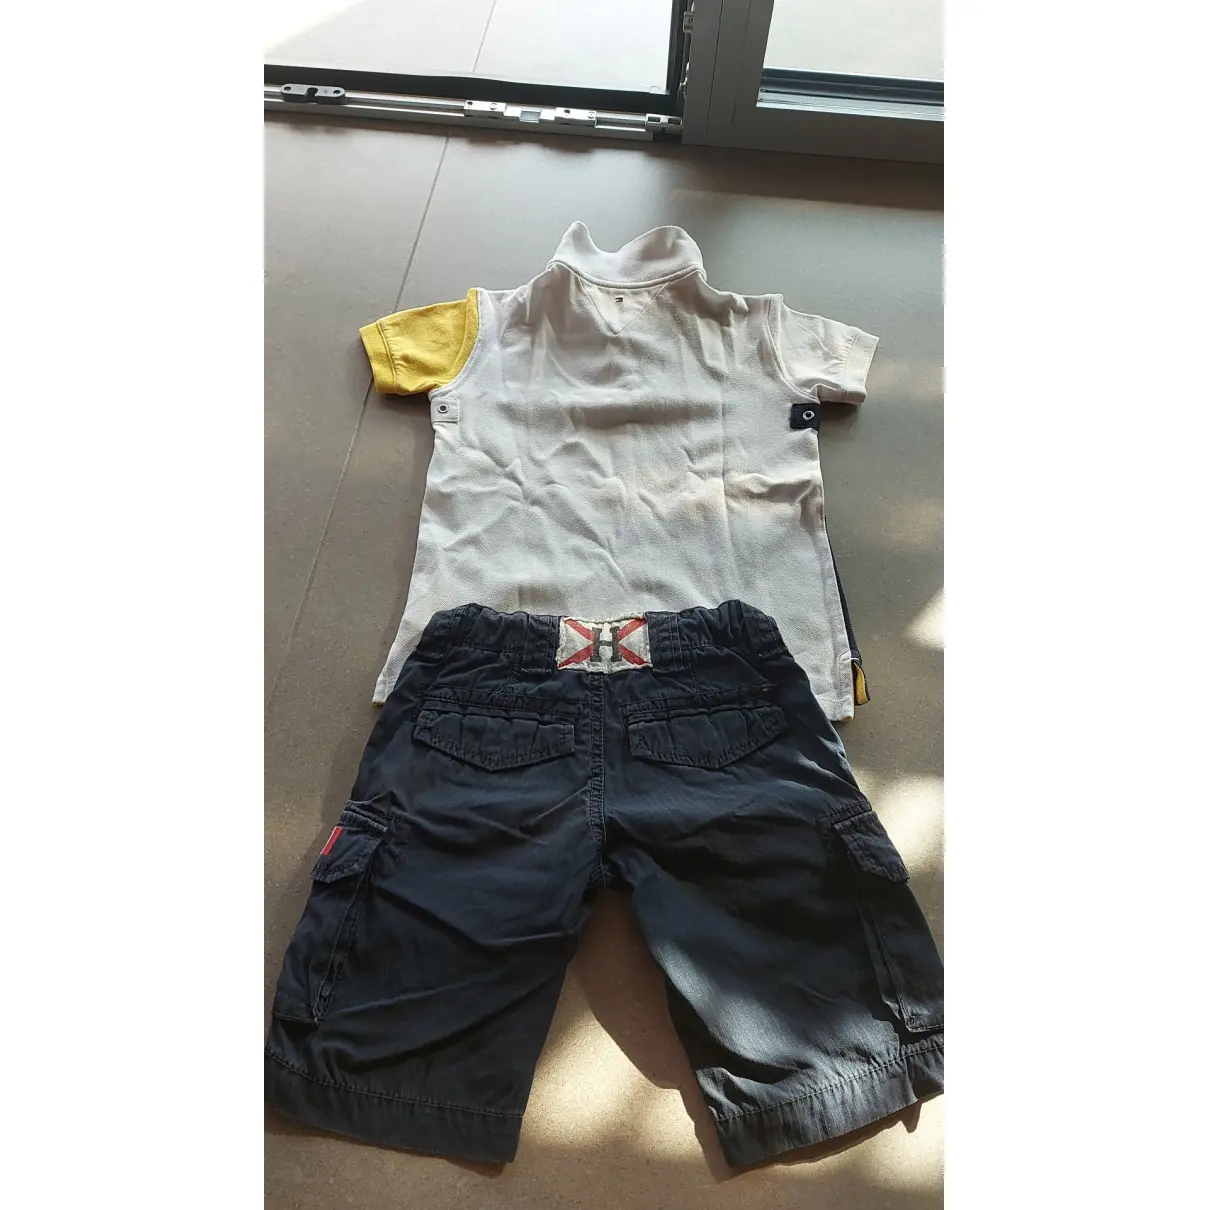 Buy Tommy Hilfiger Outfit online